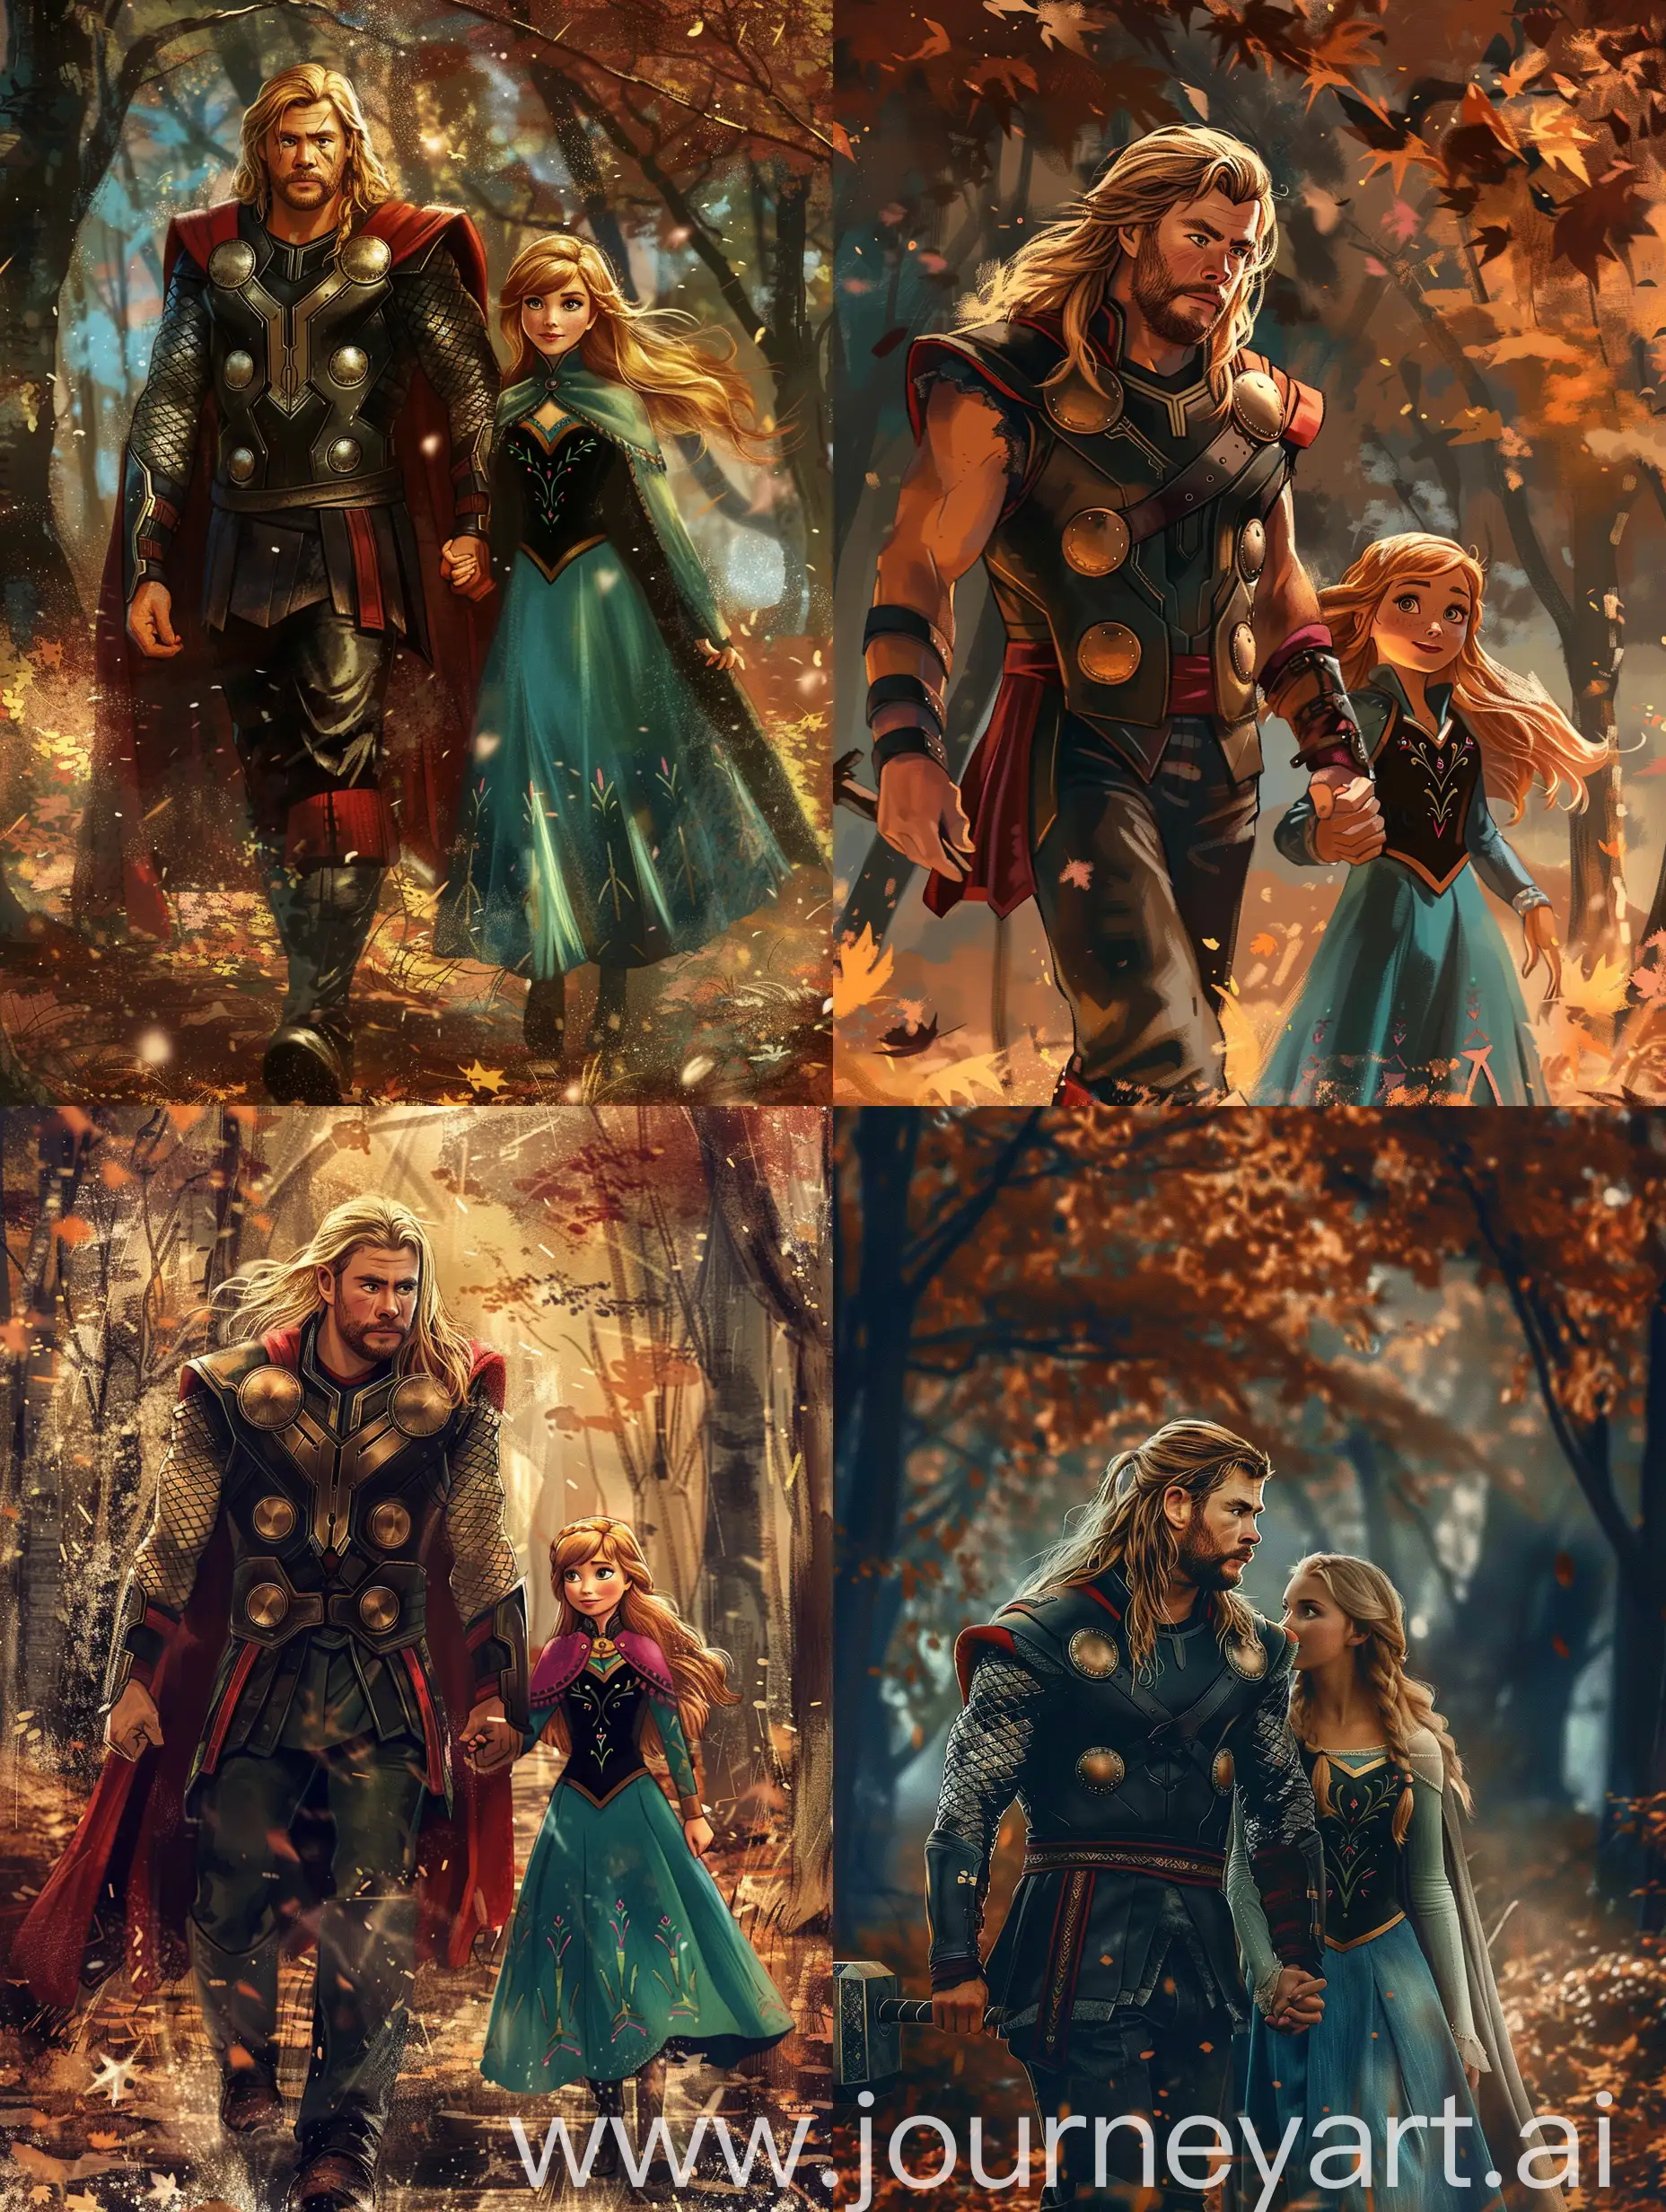 Chris Hemsworth/Thor, long blonde hair, walks with Anna from Frozen in the woods, autumn, night.